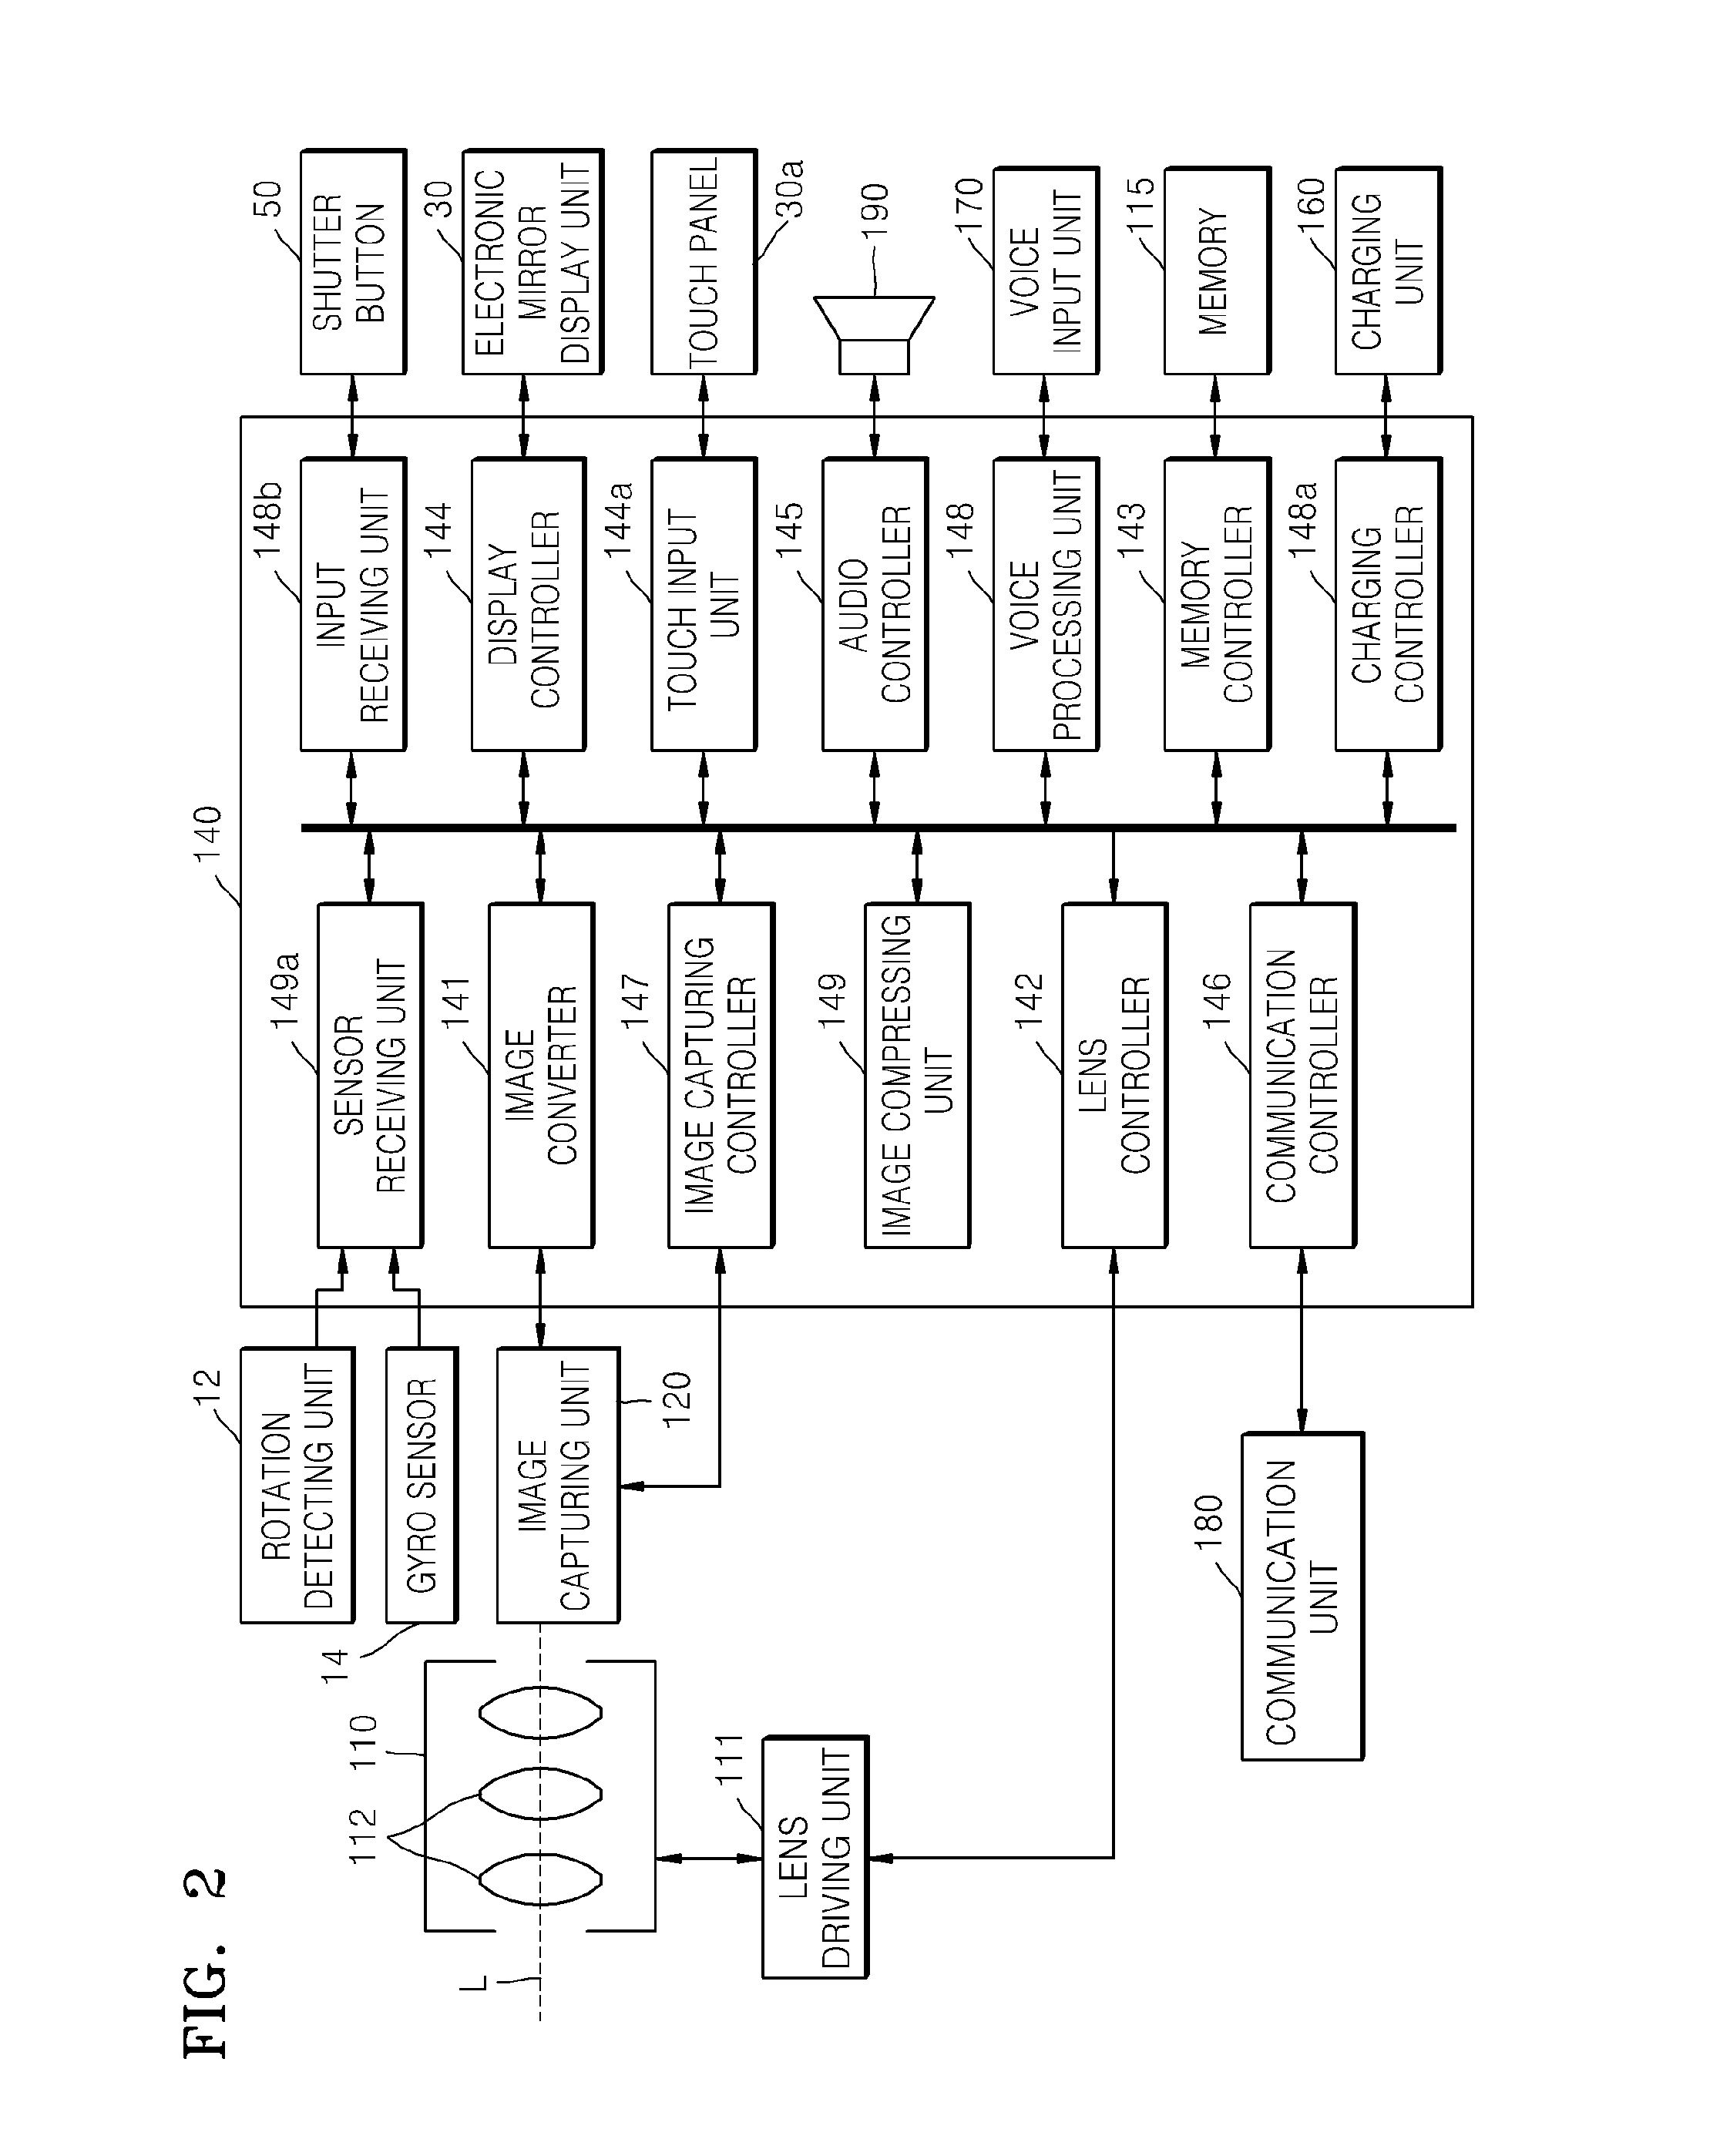 Camera with multi-function display